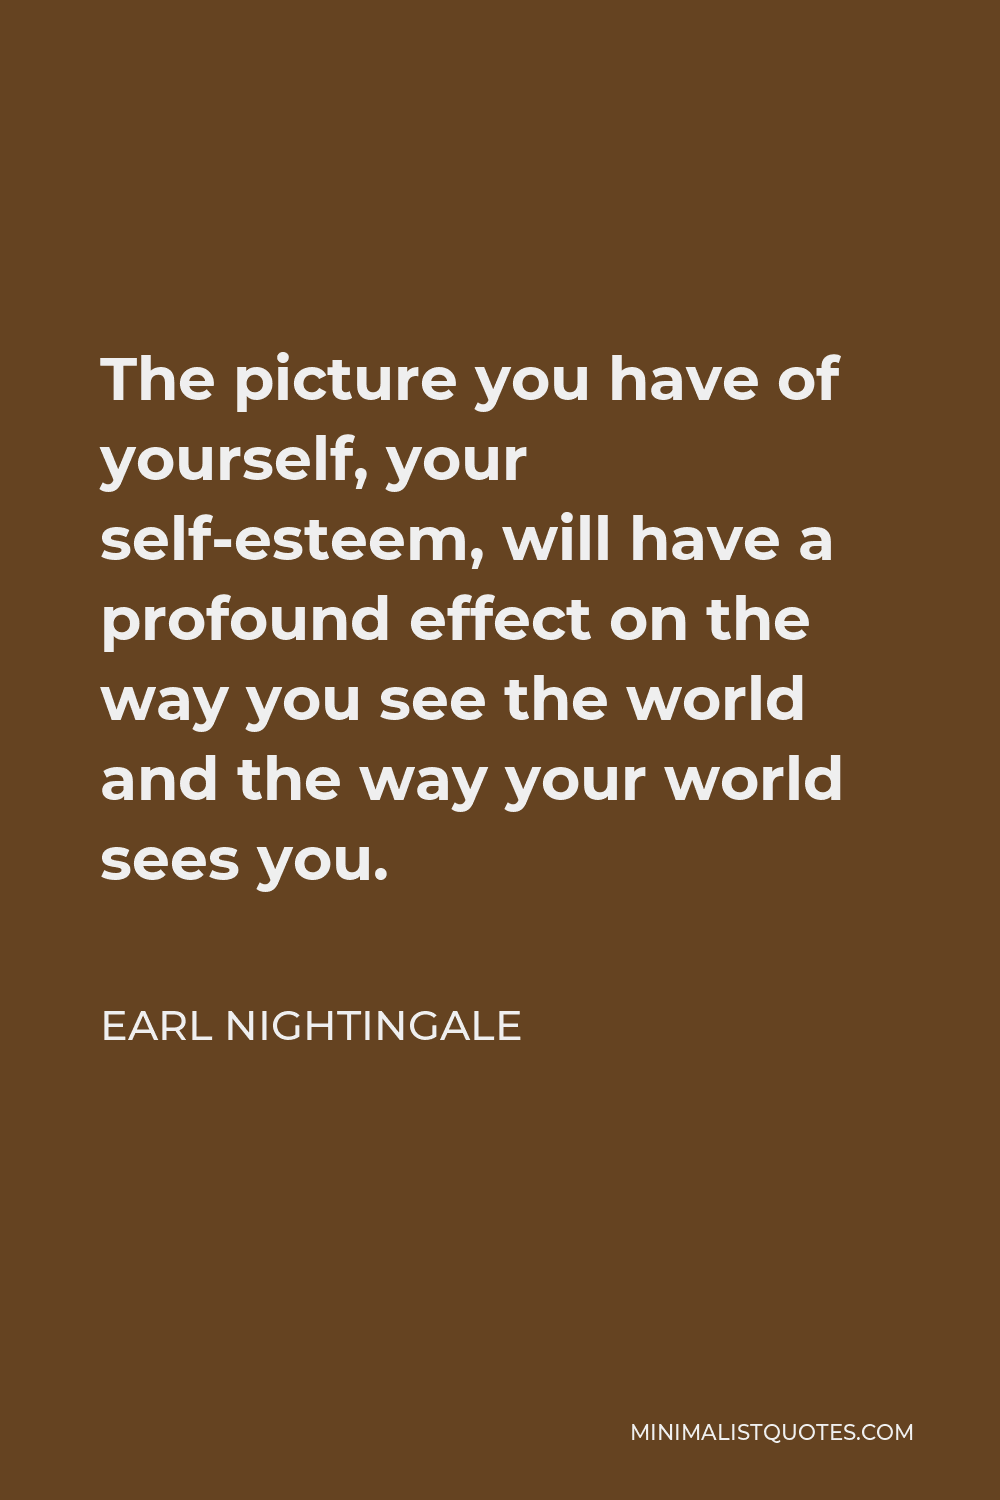 Earl Nightingale Quote - The picture you have of yourself, your self-esteem, will have a profound effect on the way you see the world and the way your world sees you.